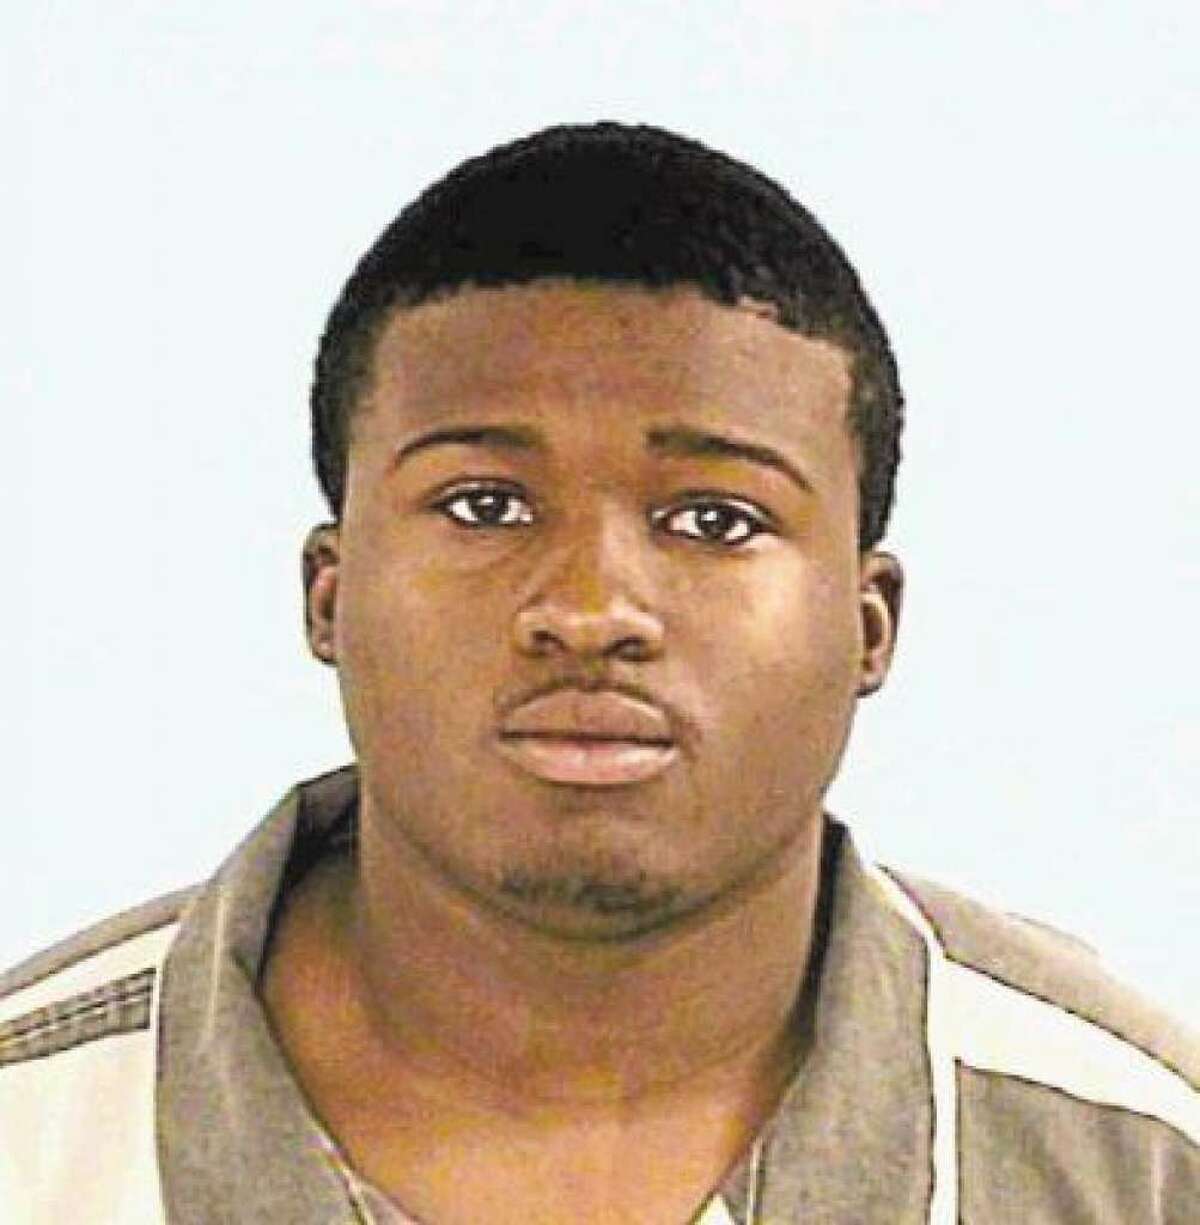 Conroe man Jaderian Williams, 22, is facing a jury Monday on a capital murder charge from his alleged role in the death of Conroe High School graduate Geovany Ponce-Reyers in June 2013. Continue clicking to see the safest and least safe states for gun violence in America.